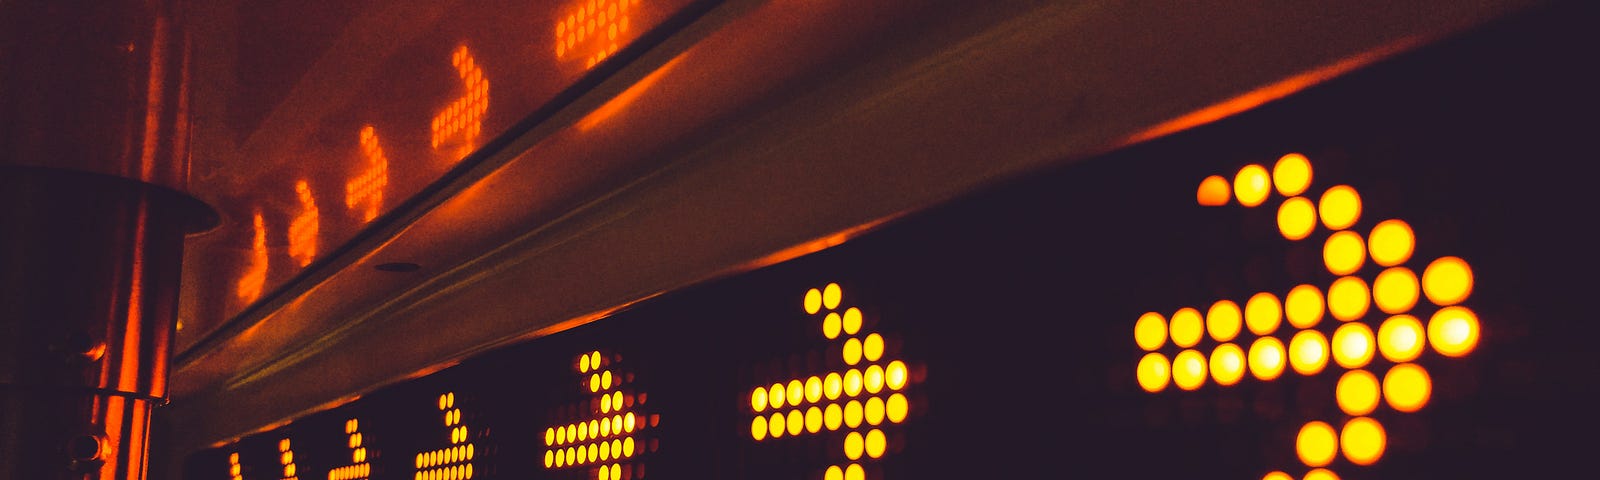 Series of neon yellow lights in the shape of arrows pointing to stage right. There are seven arrows in groups of three. Their reflections can be seen above them in an orange-red color.